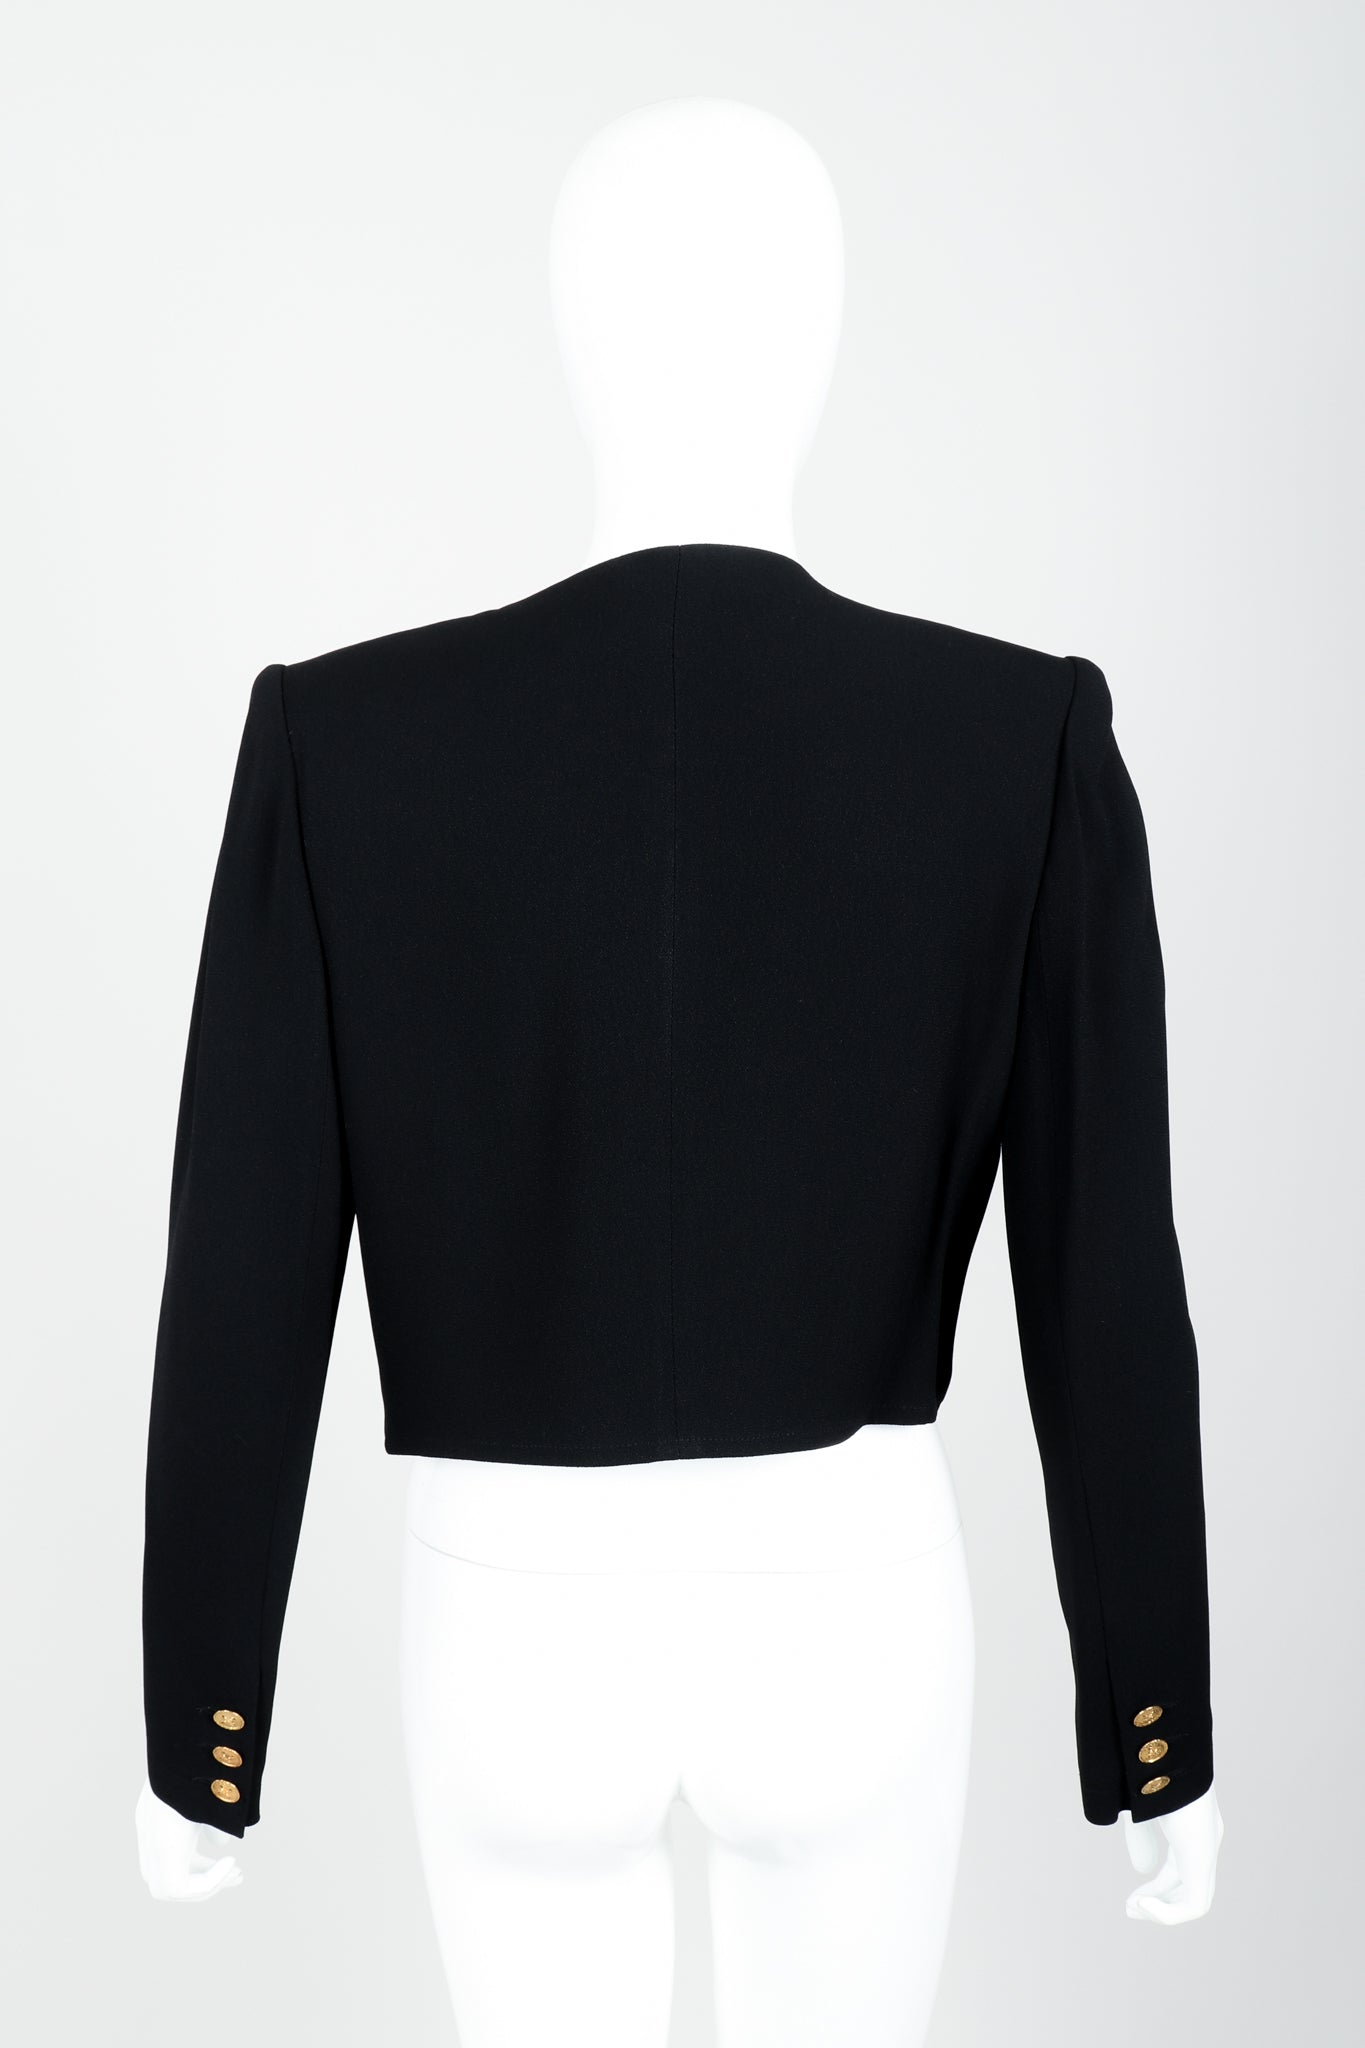 Vintage Sonia Rykiel Chanel Style Boxy Jacket Suit on Mannequin back at Recess